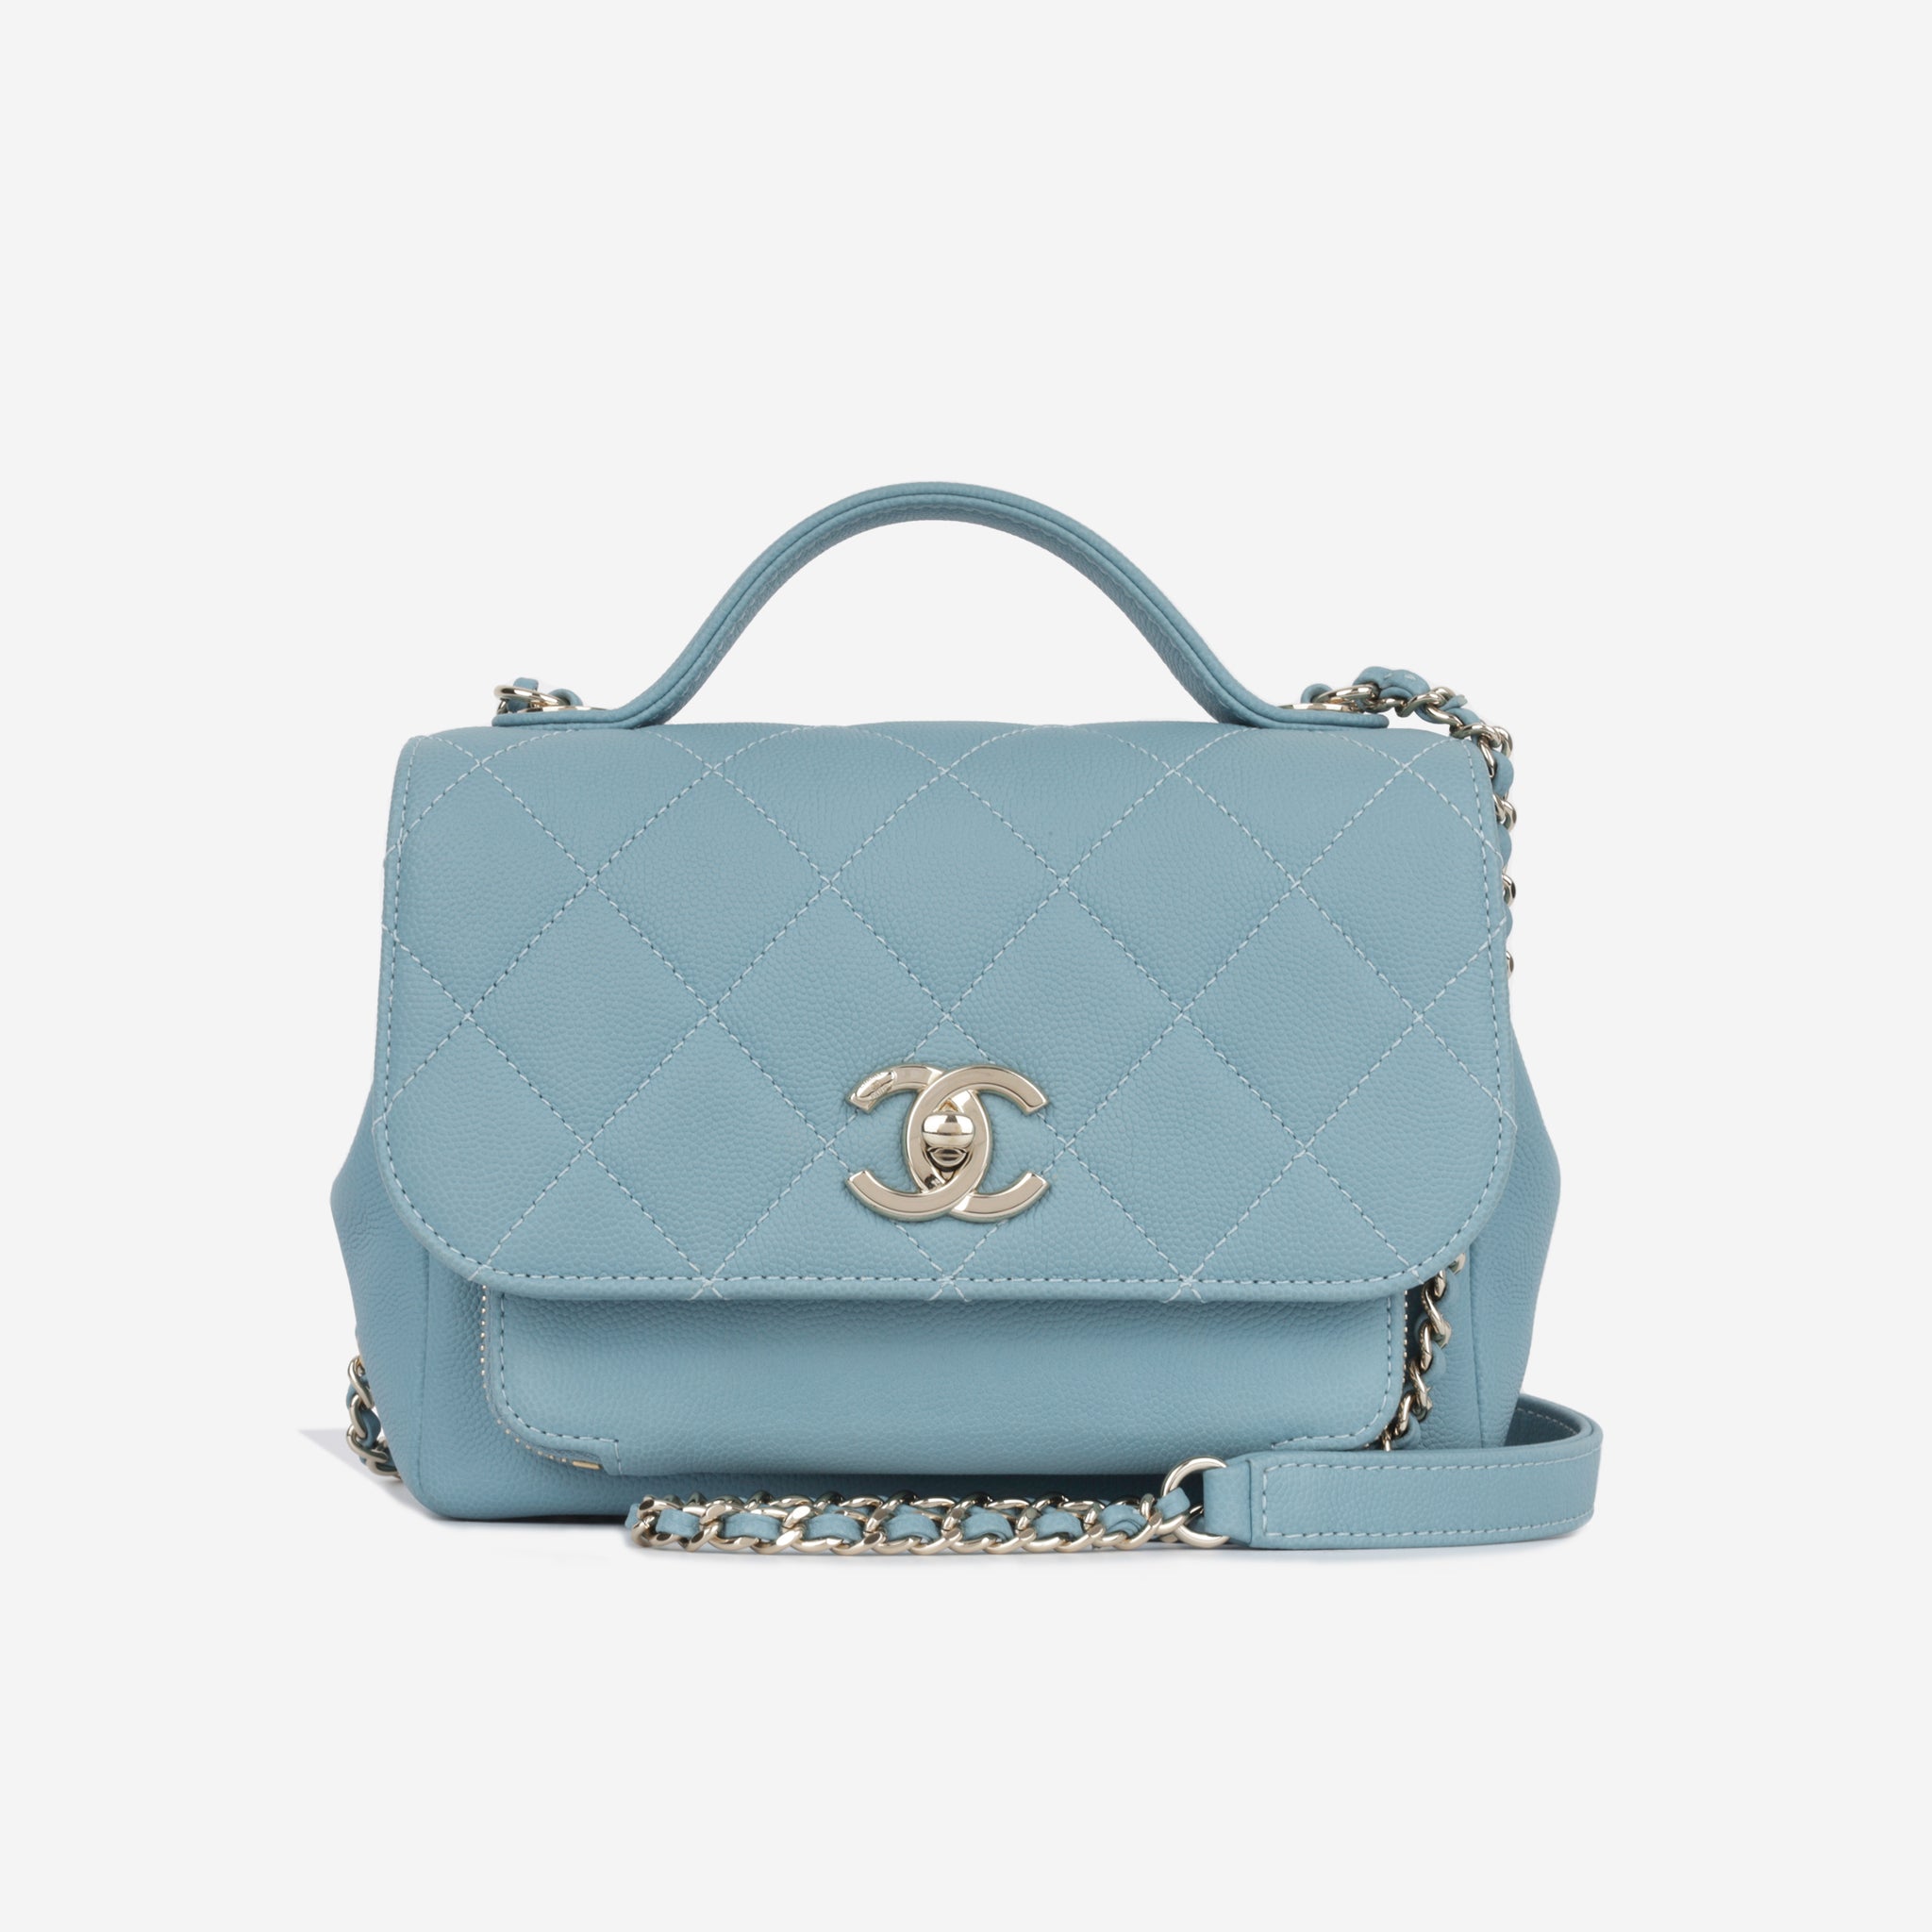 Chanel - Small Business Affinity Flap Bag - Matte Teal Caviar CGHW - 2019